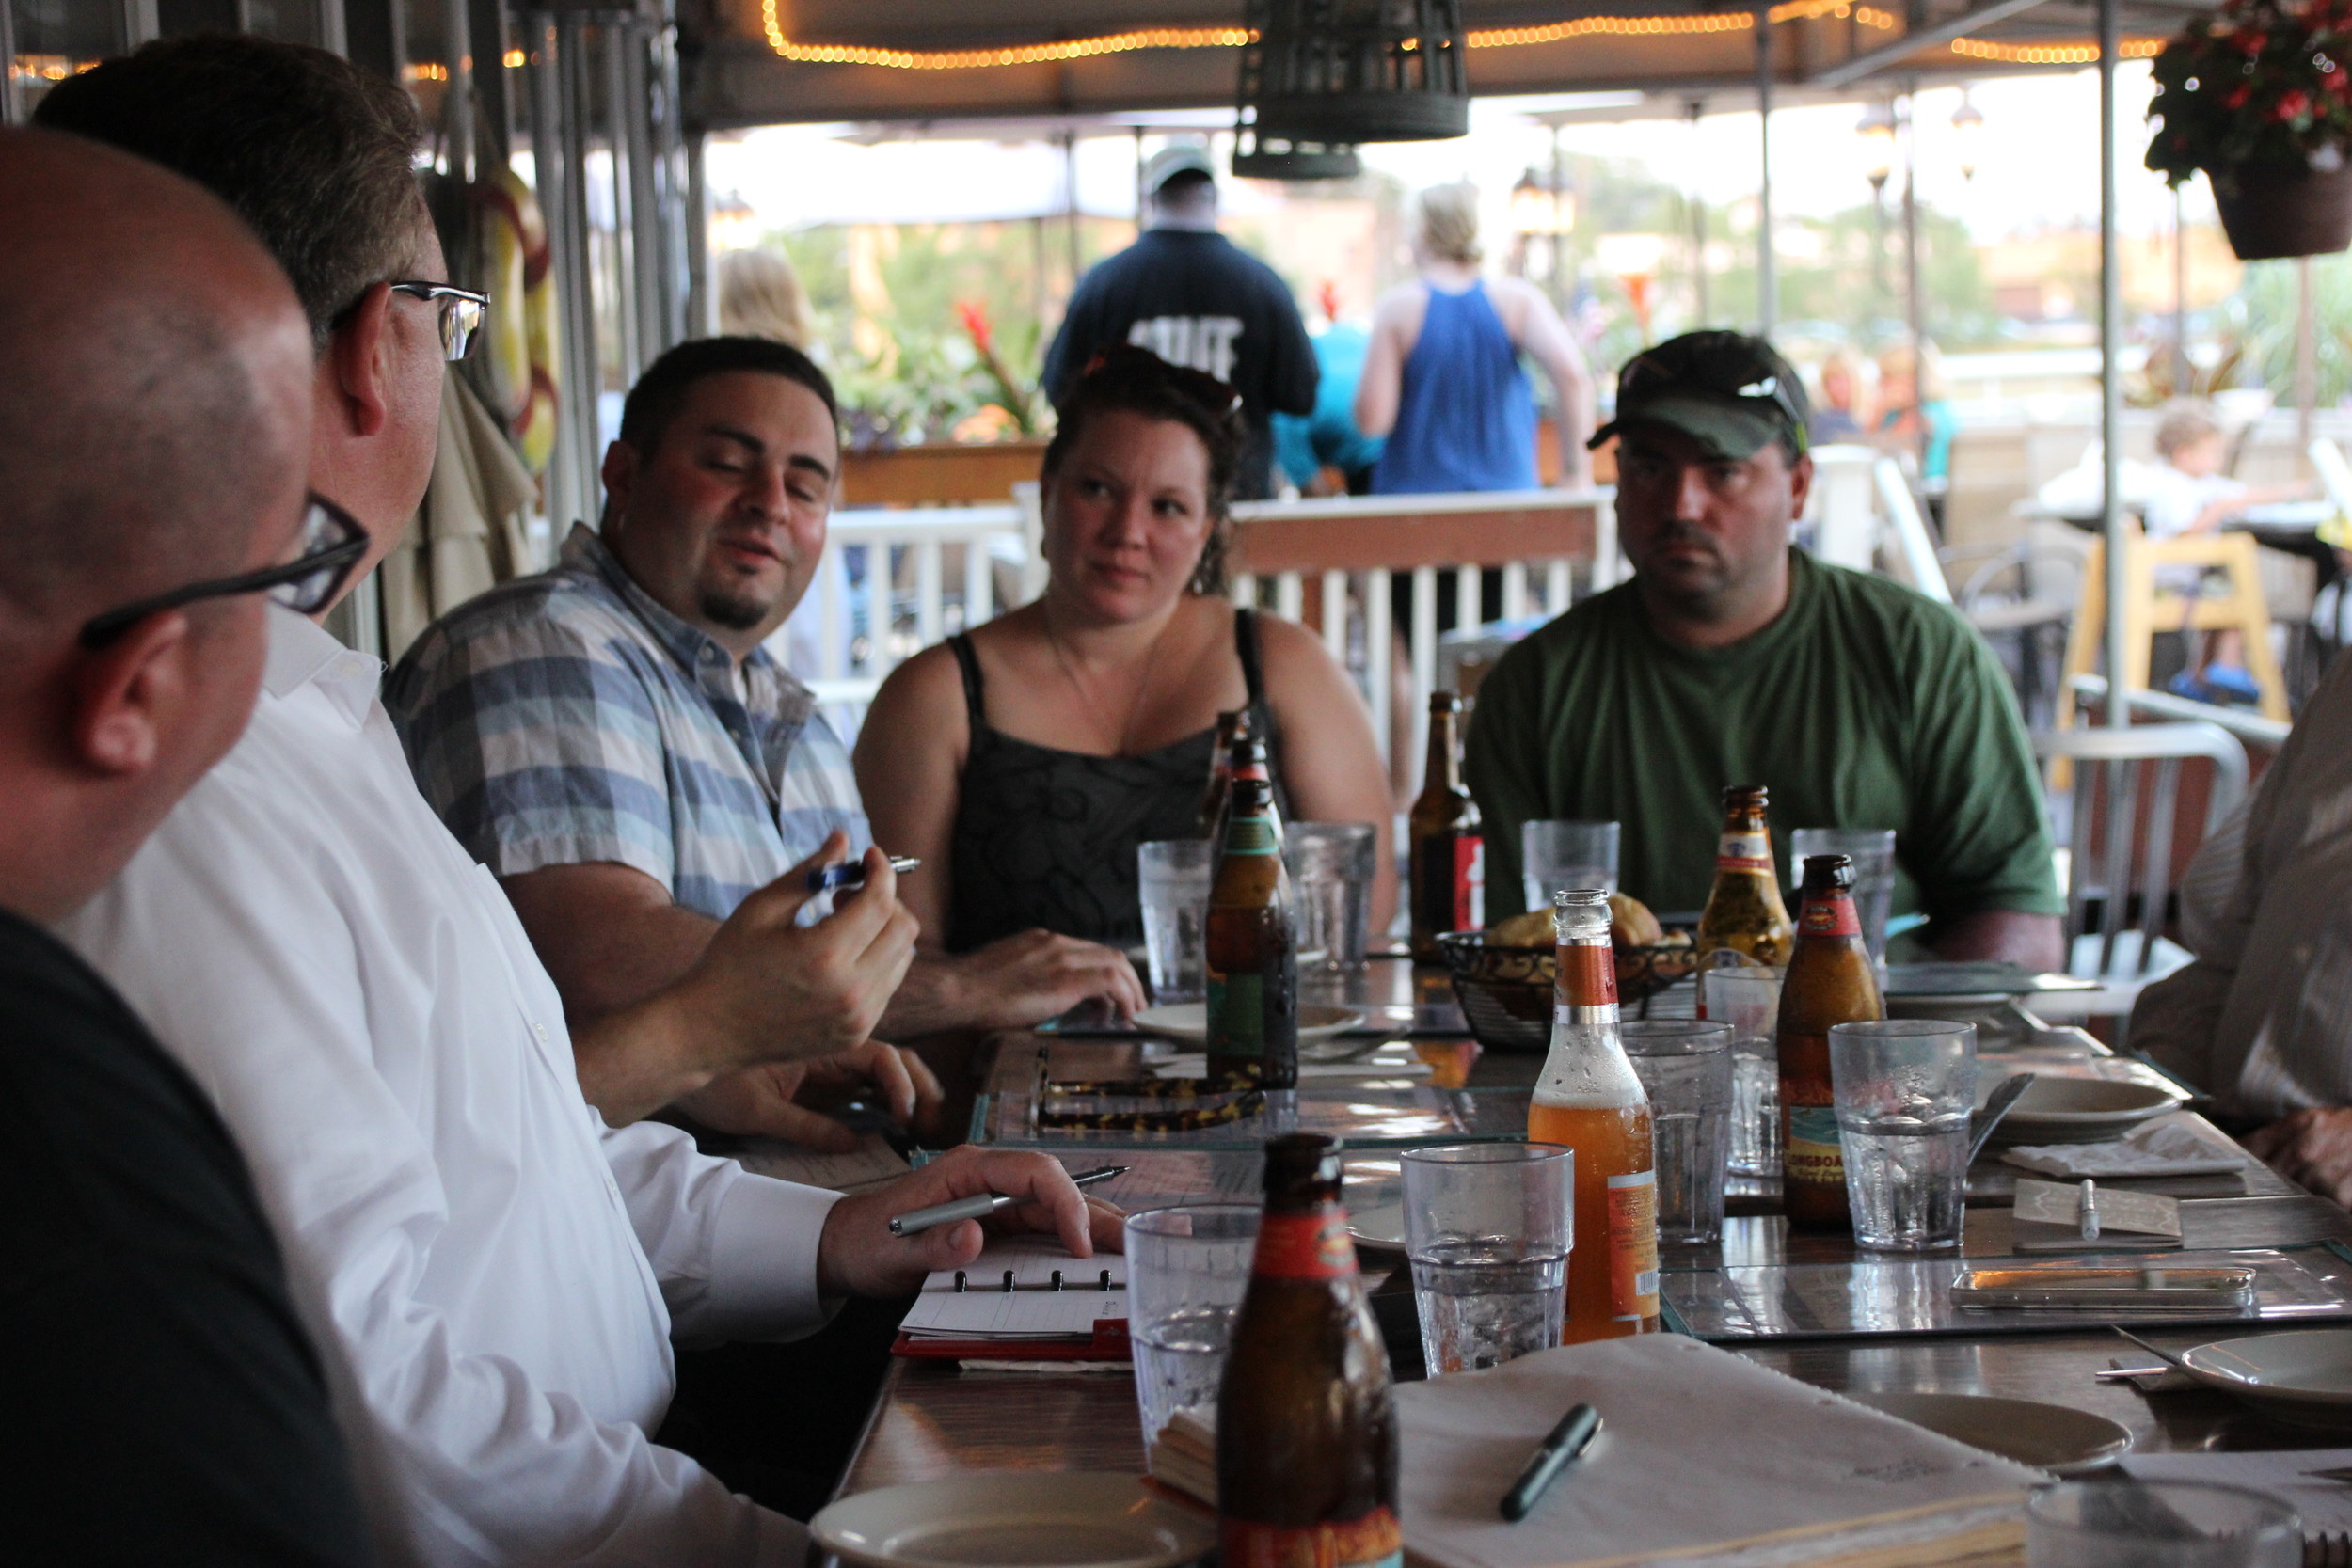 Residents met casually at Reel on July 6 to discuss creative ideas for attracting new businesses to the community.